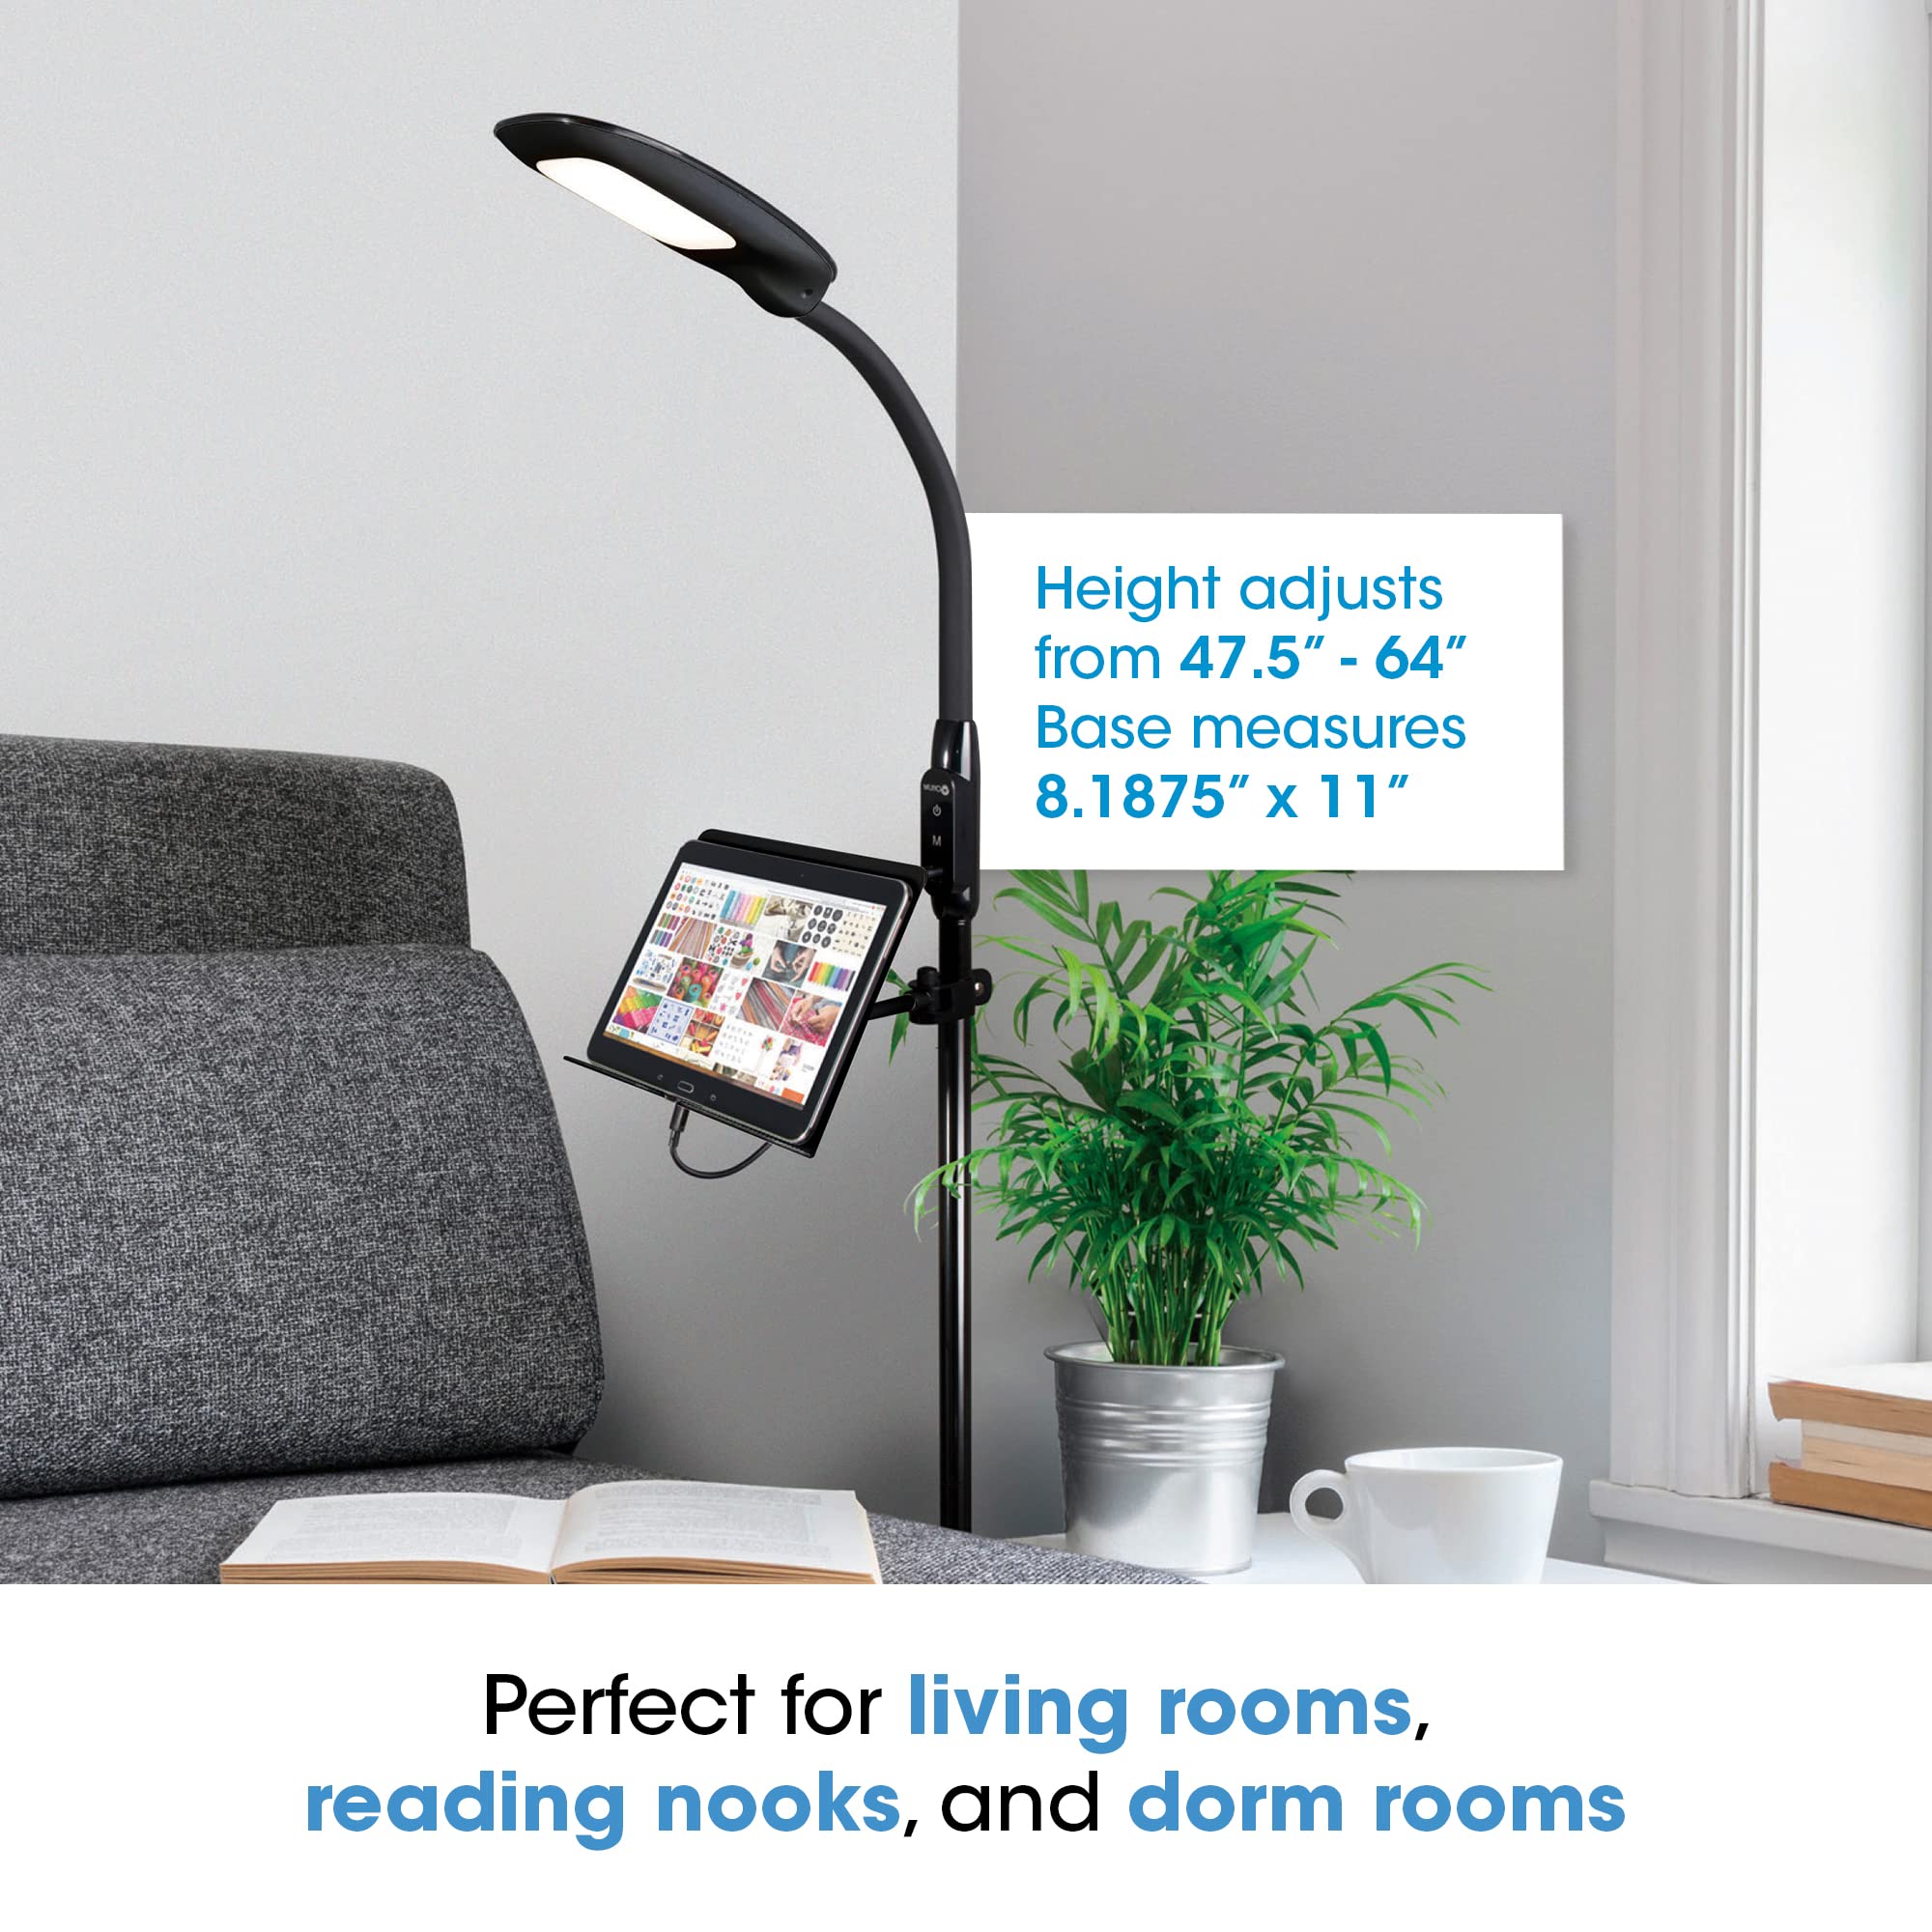 OttLite LED Floor Lamp with USB Charging Port & Tablet Stand - ClearSun LED Technology - 4 Brightness Settings & 3 Color Temperature Modes - Touch Activated Controls, for Home, Reading & Dorms